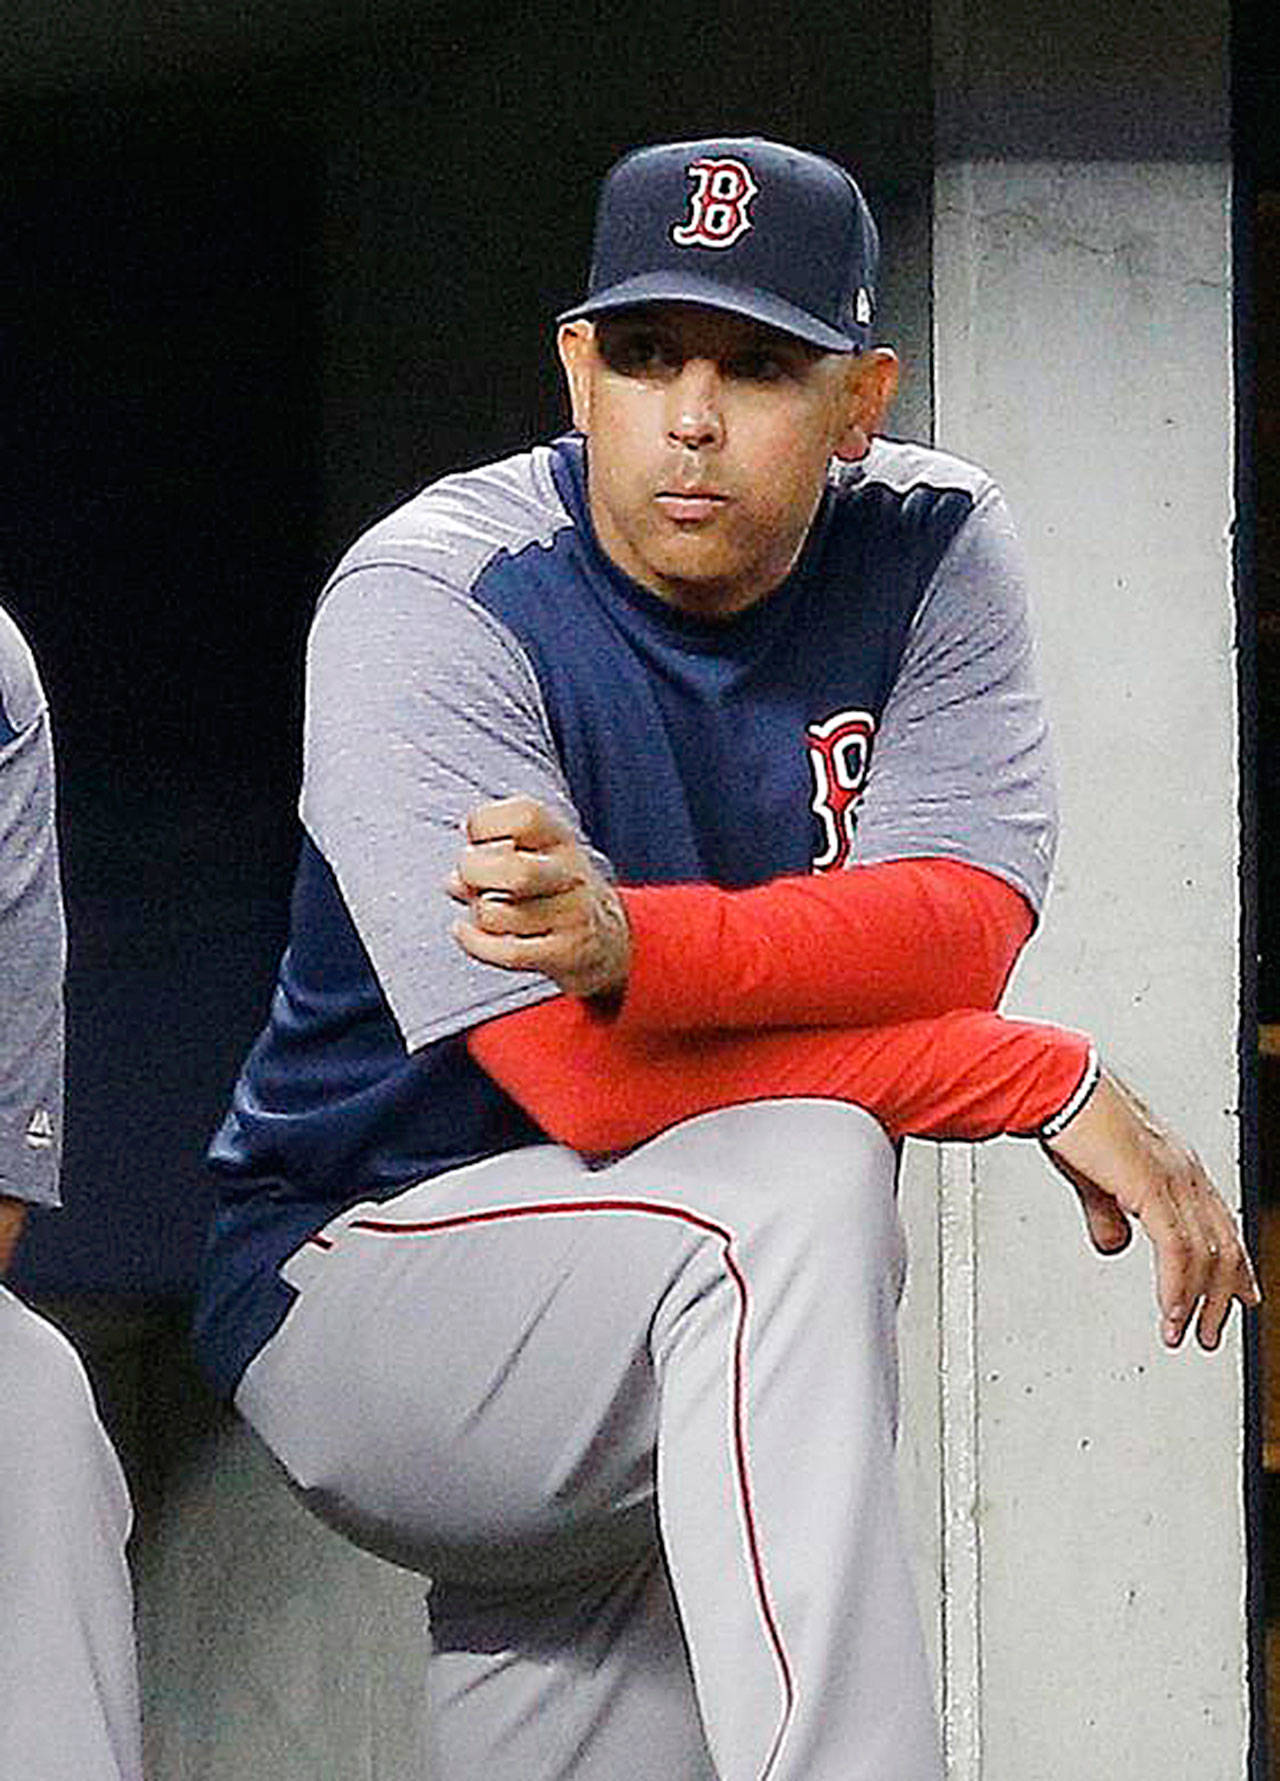 Red Sox manager Alex Cora faces similar penalties to those assessed Hinch, pending MLB’s ongoing investigation. (Andy Marlin | USA Today Sports)